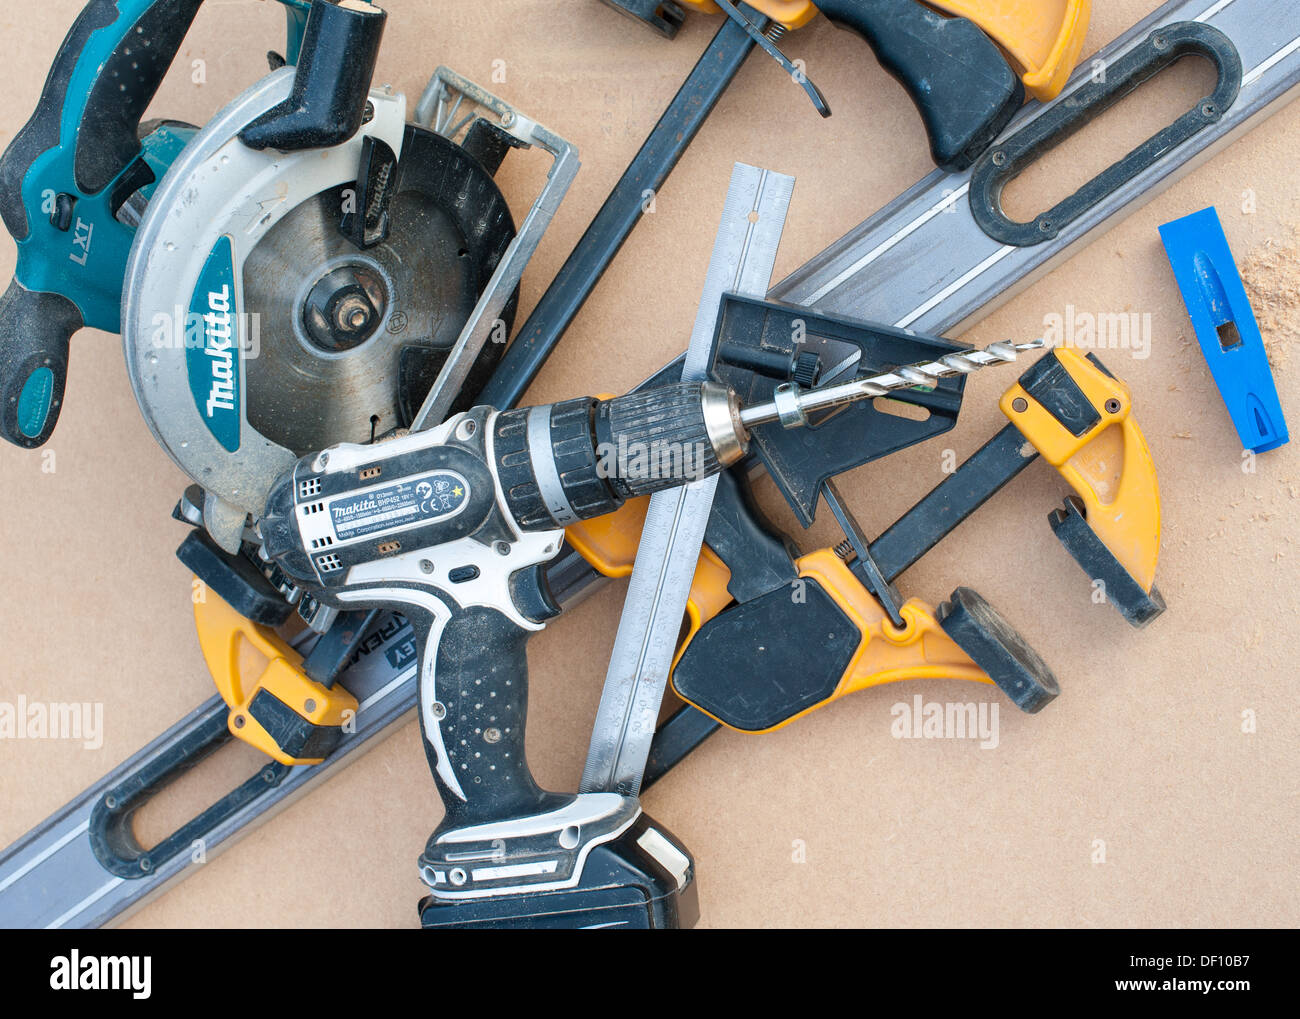 Power tools on a workbench Stock Photo